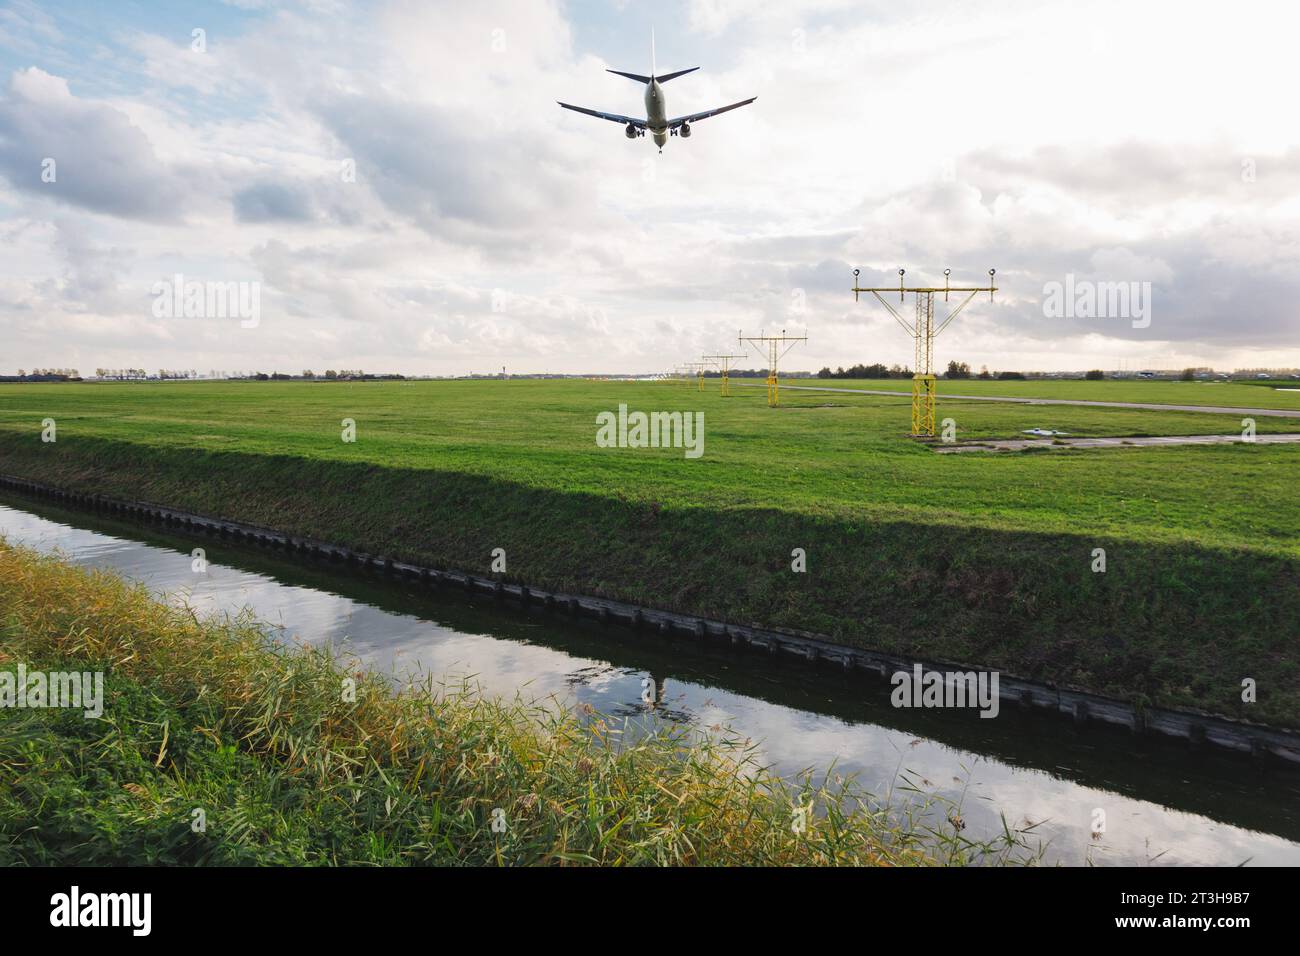 an Airbus A320 jet on approach to Amsterdam Schiphol airport's Polderbaan runway, which is separated from public areas by a canal Stock Photo